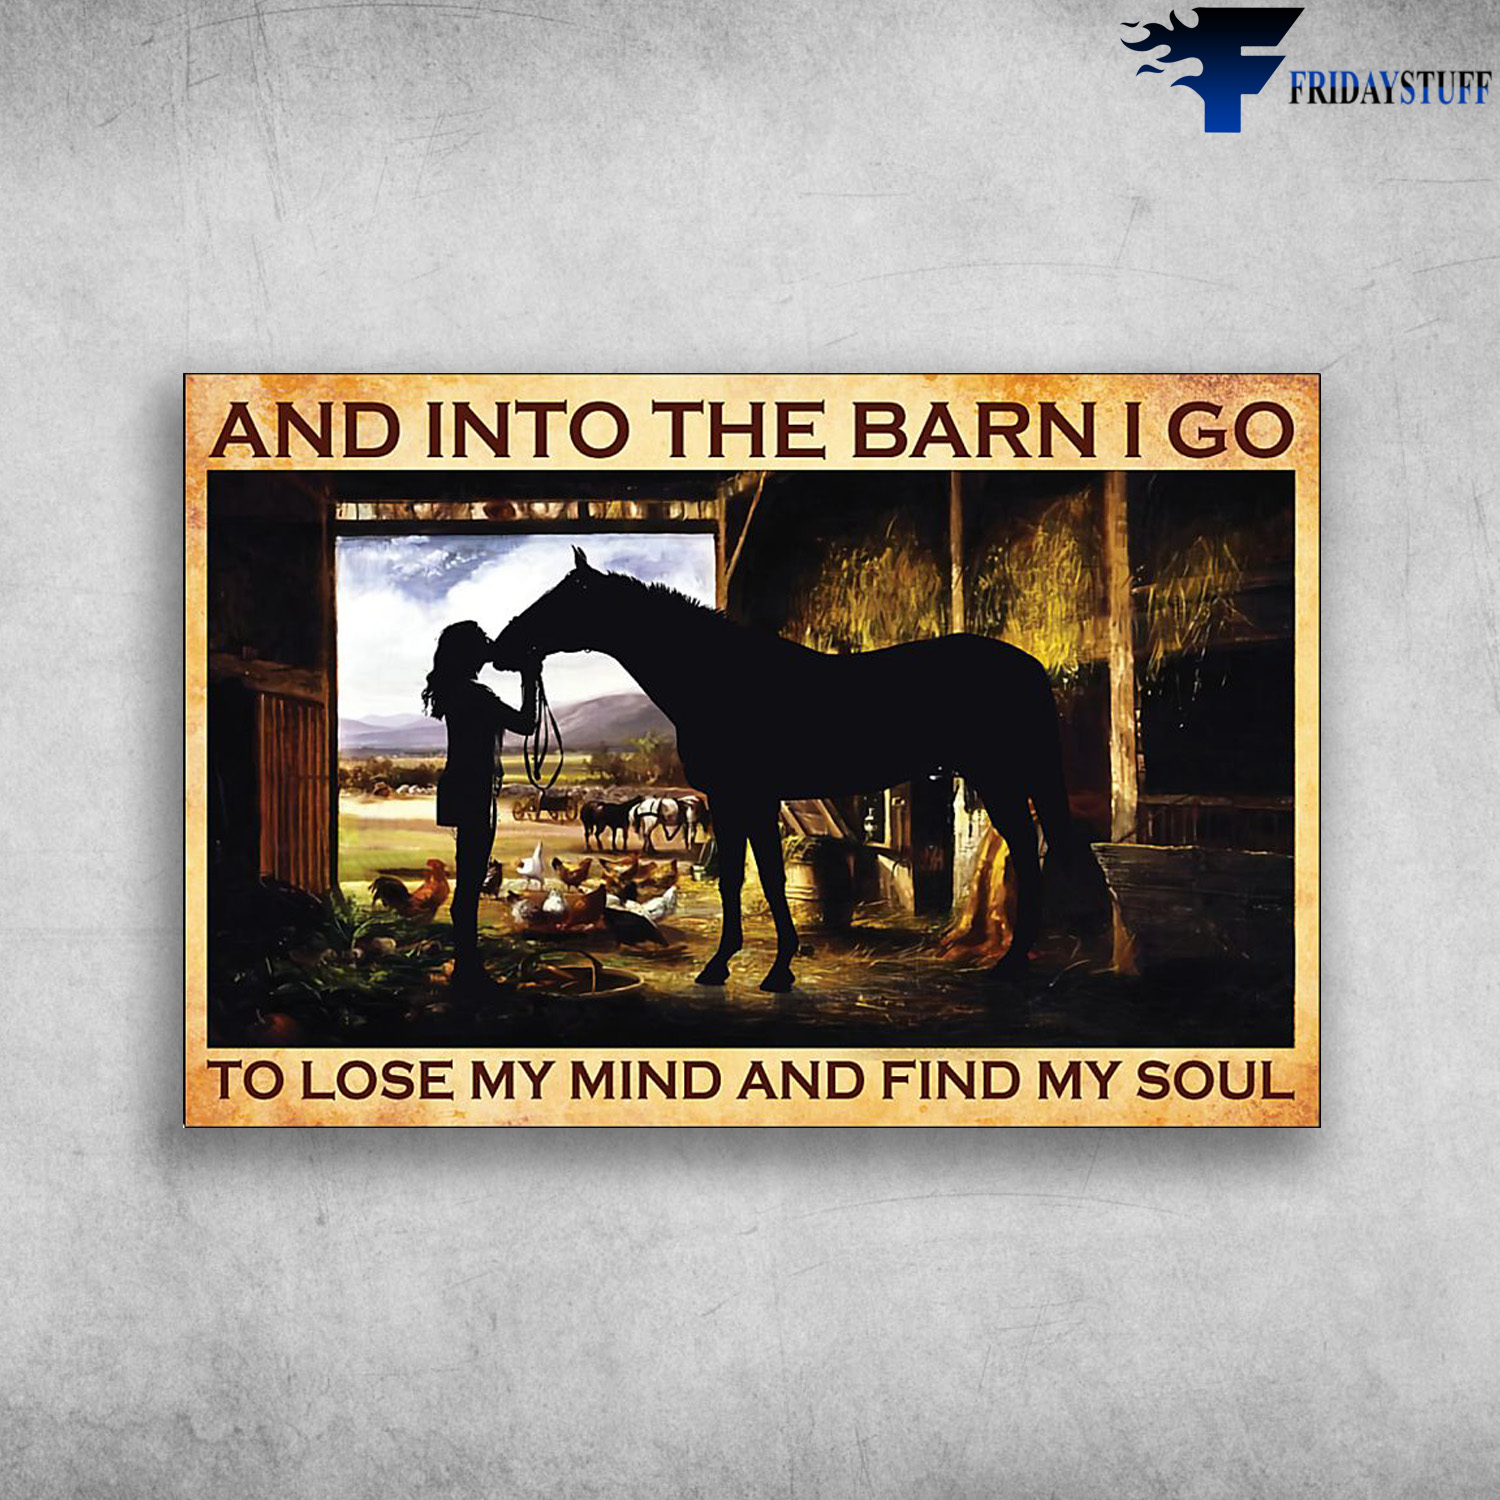 The Girl Loves Horse - And In To The Barn, I Go To Lose My Mind And Find My Soul